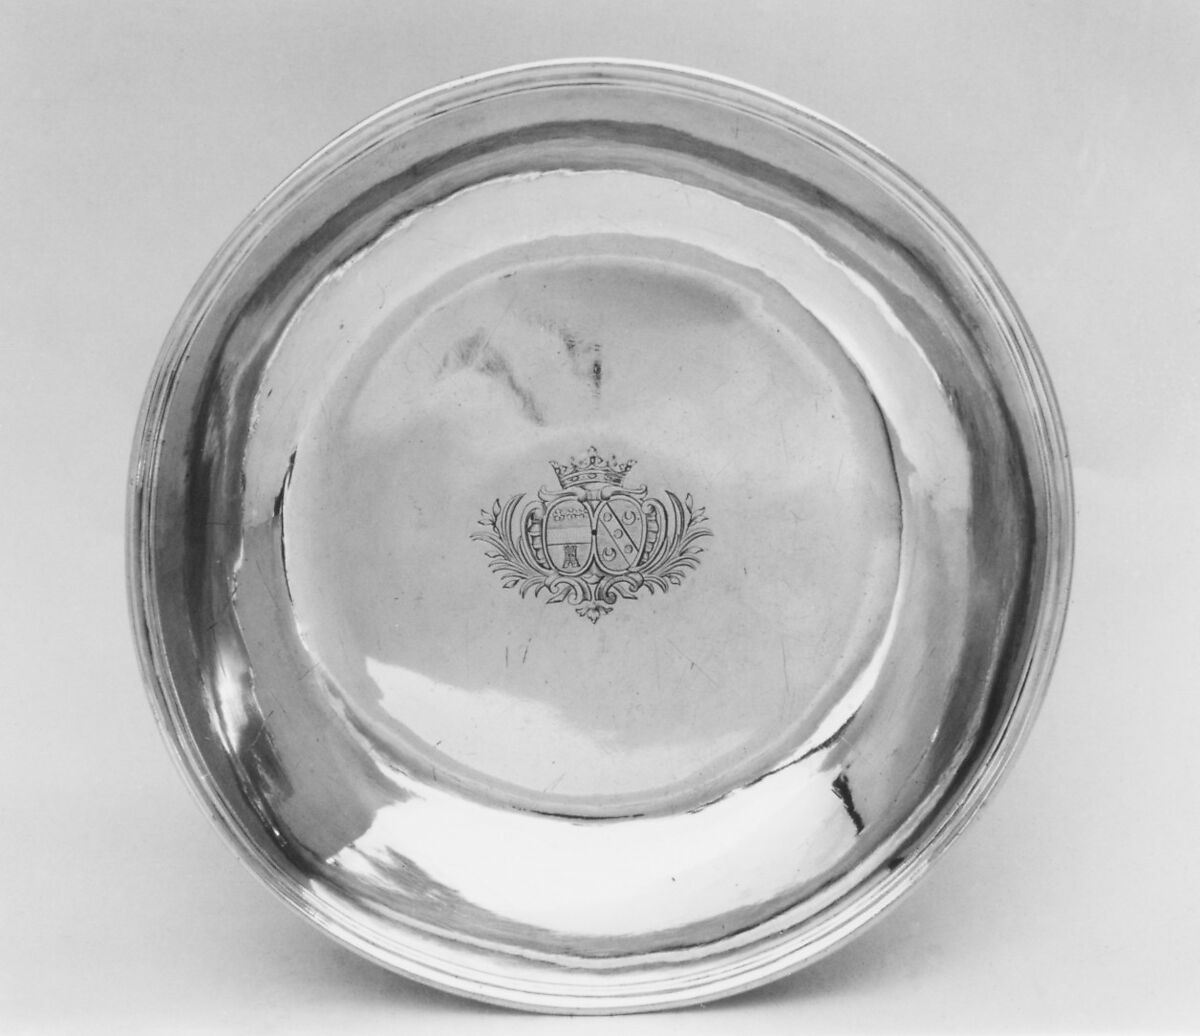 Dish (one of a pair), Silver, French, Paris 